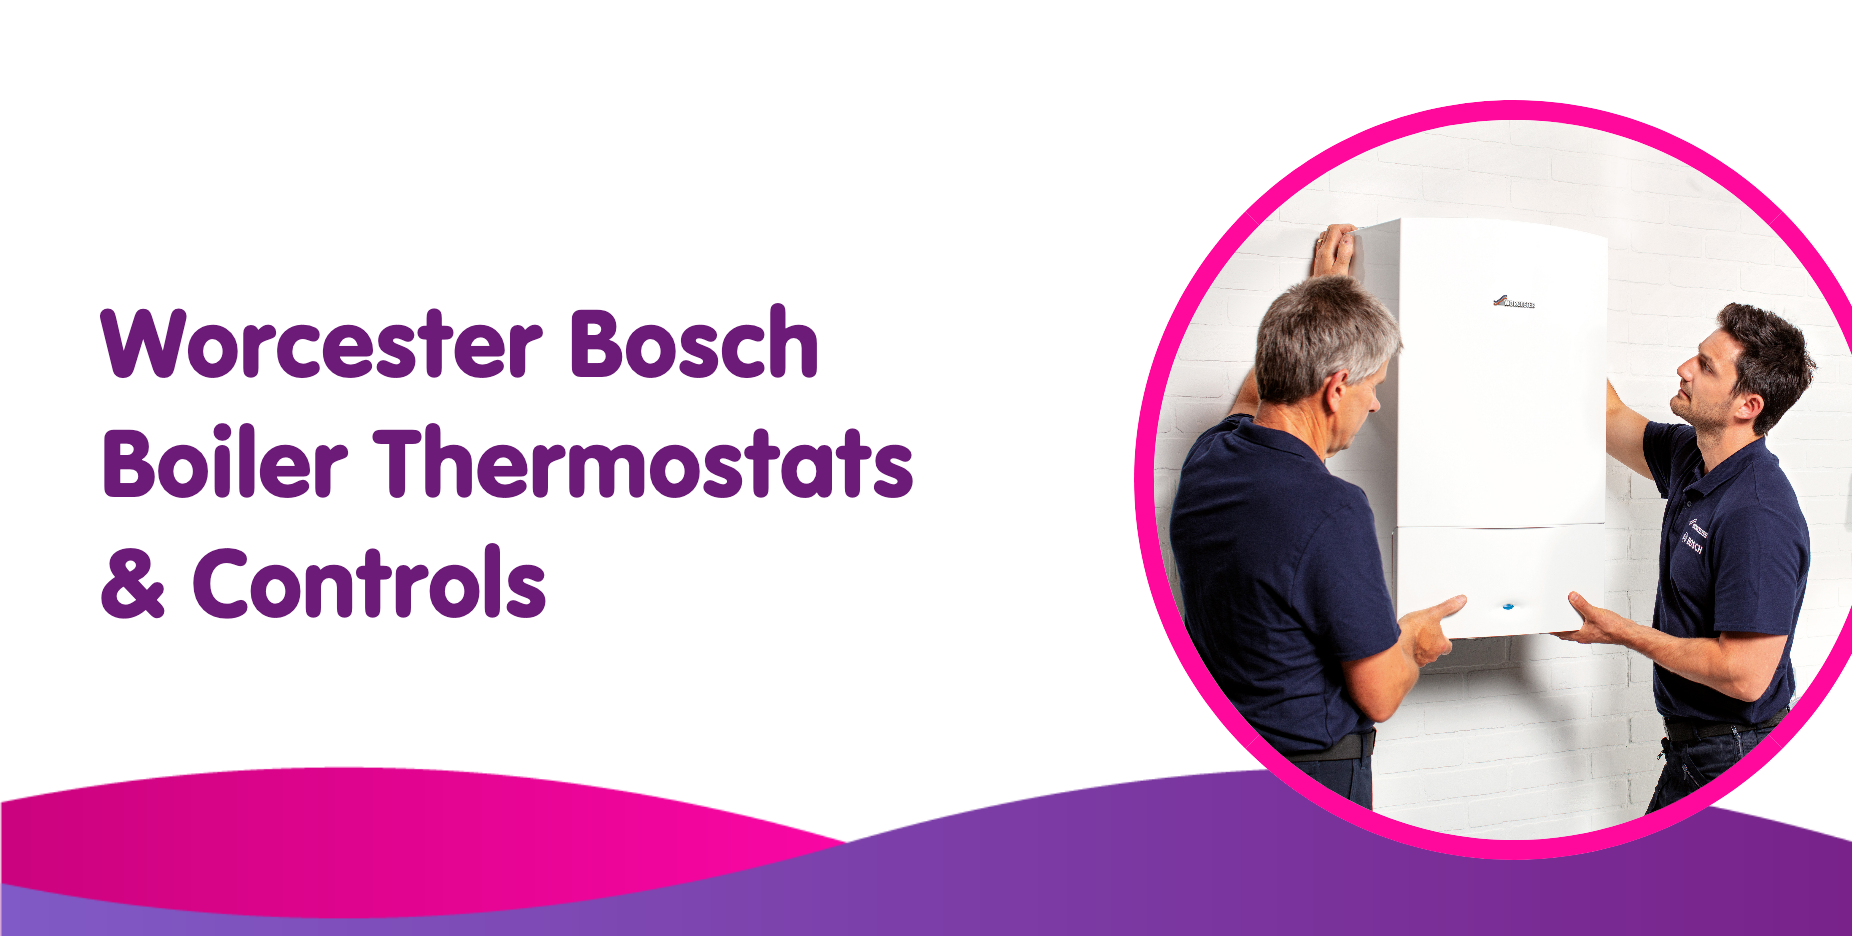 Worcester Bosch Boiler Thermostats & Controls